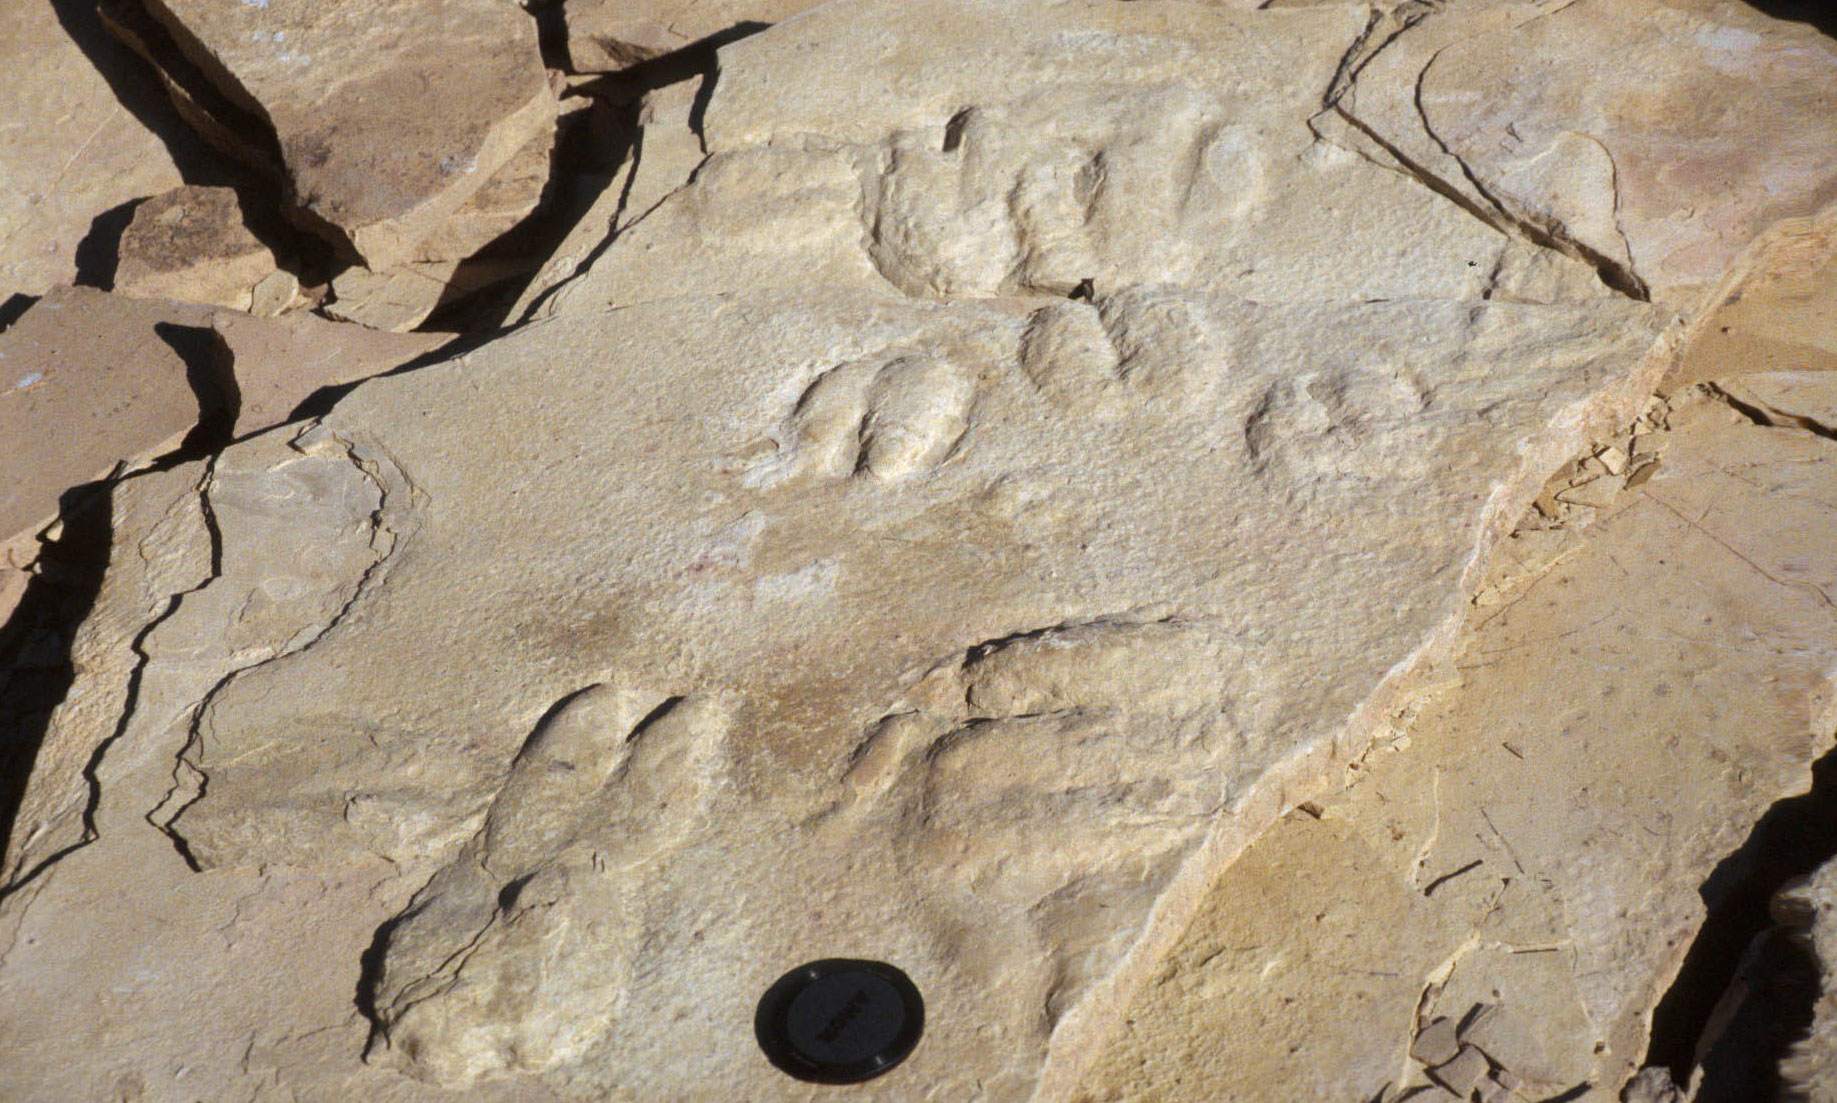 Photograph of the impressions of camel feet preserved in light brown stone. The hoofprints are each made up of two oval indentations, reflecting the two toes of the camel hoof.